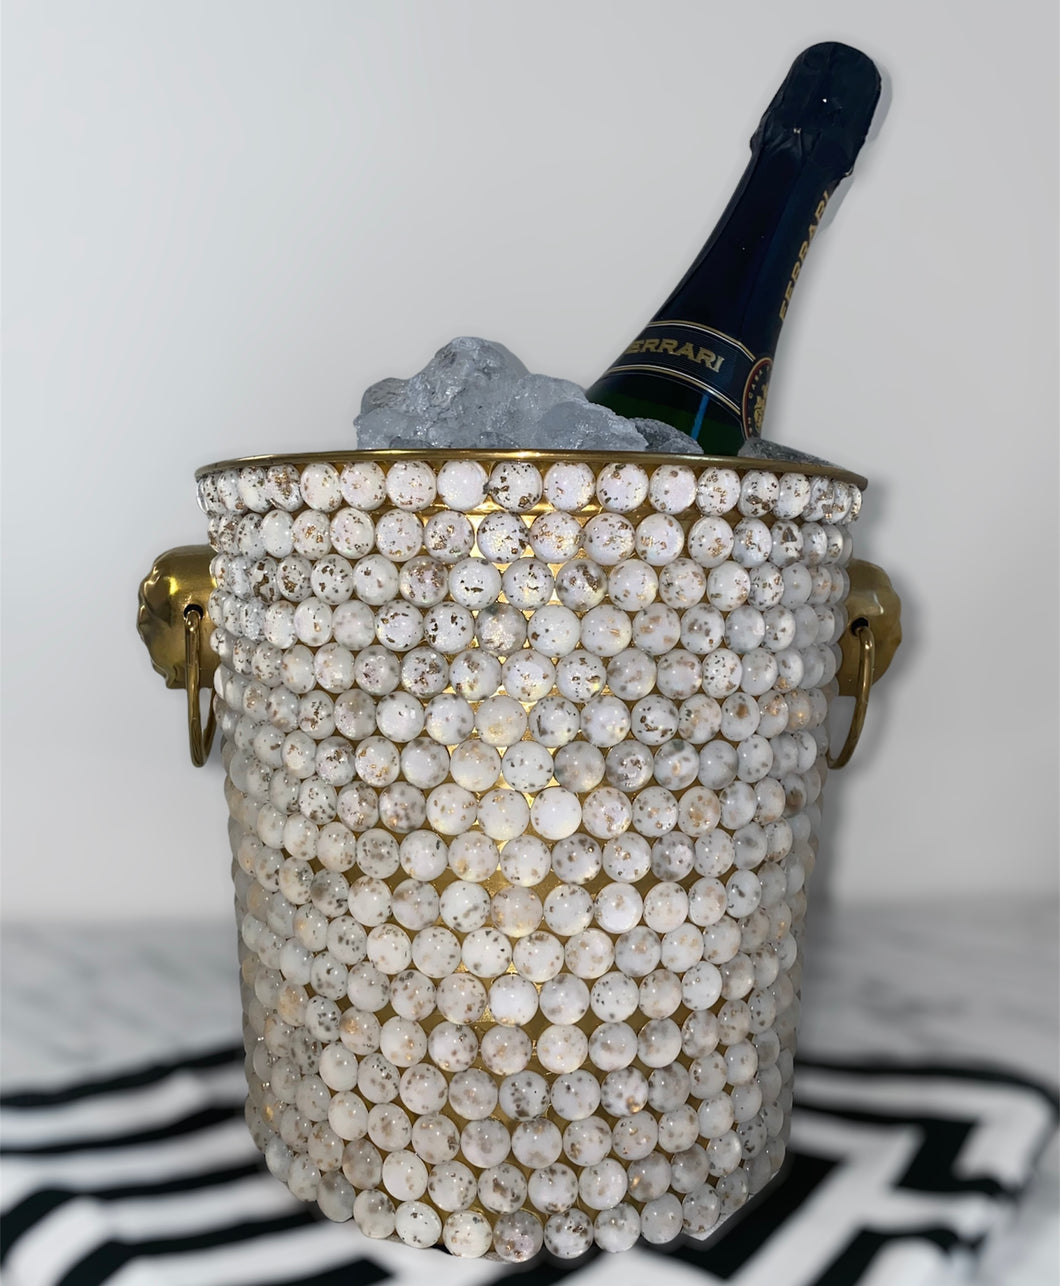 Pierres rouges Perles Cristaux Faux Diamante Diamonds Champagne Ice Bucket Drinks Cooler Stainless Steel